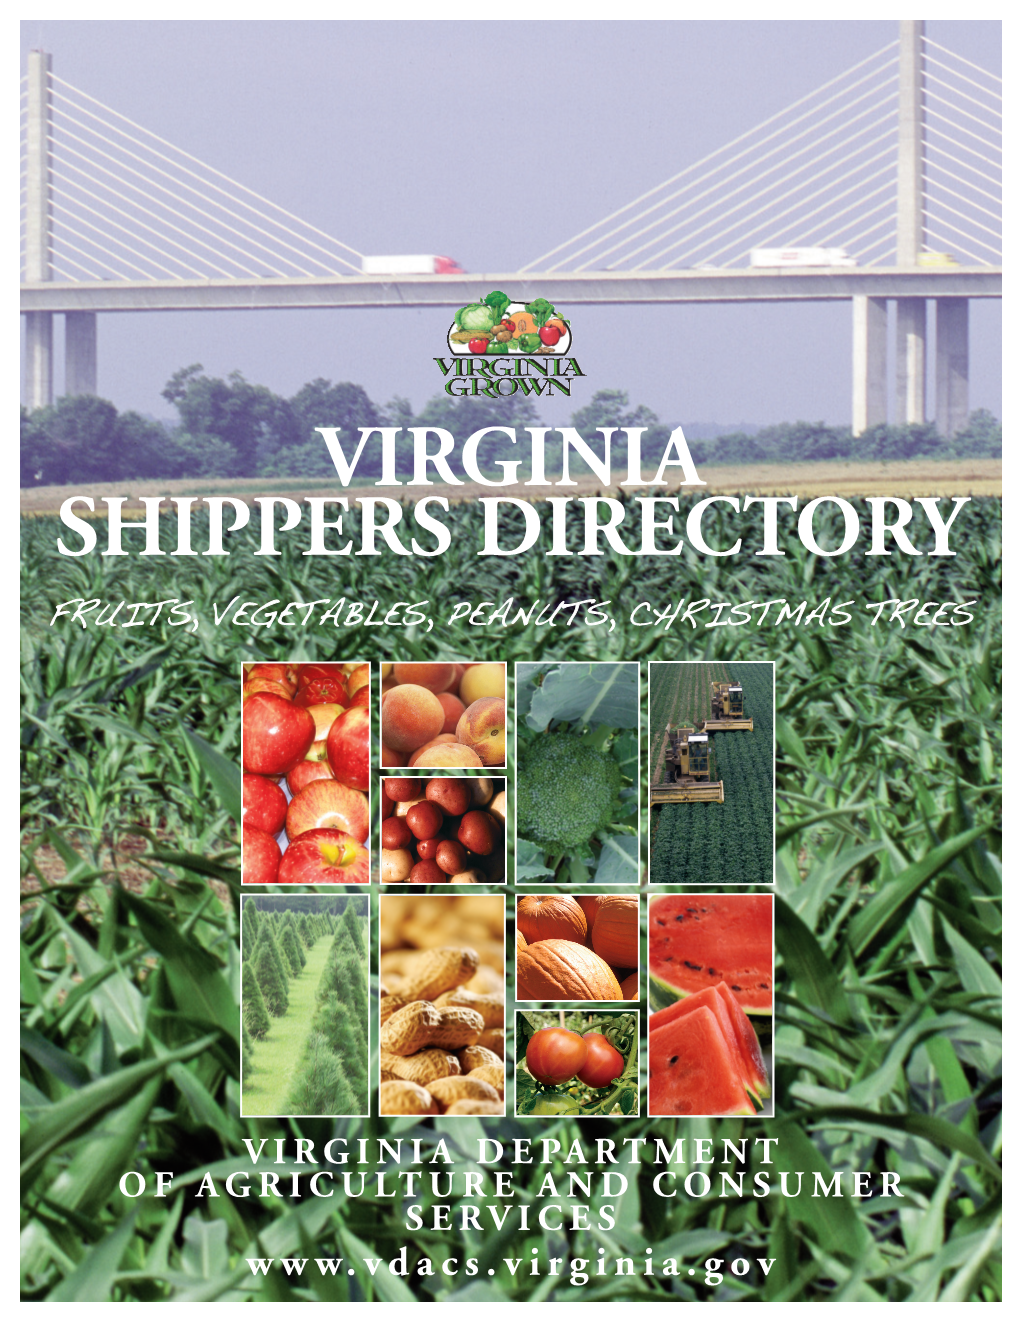 Virginia Shippers Directory Fruits, Vegetables, Peanuts, Christmas Trees